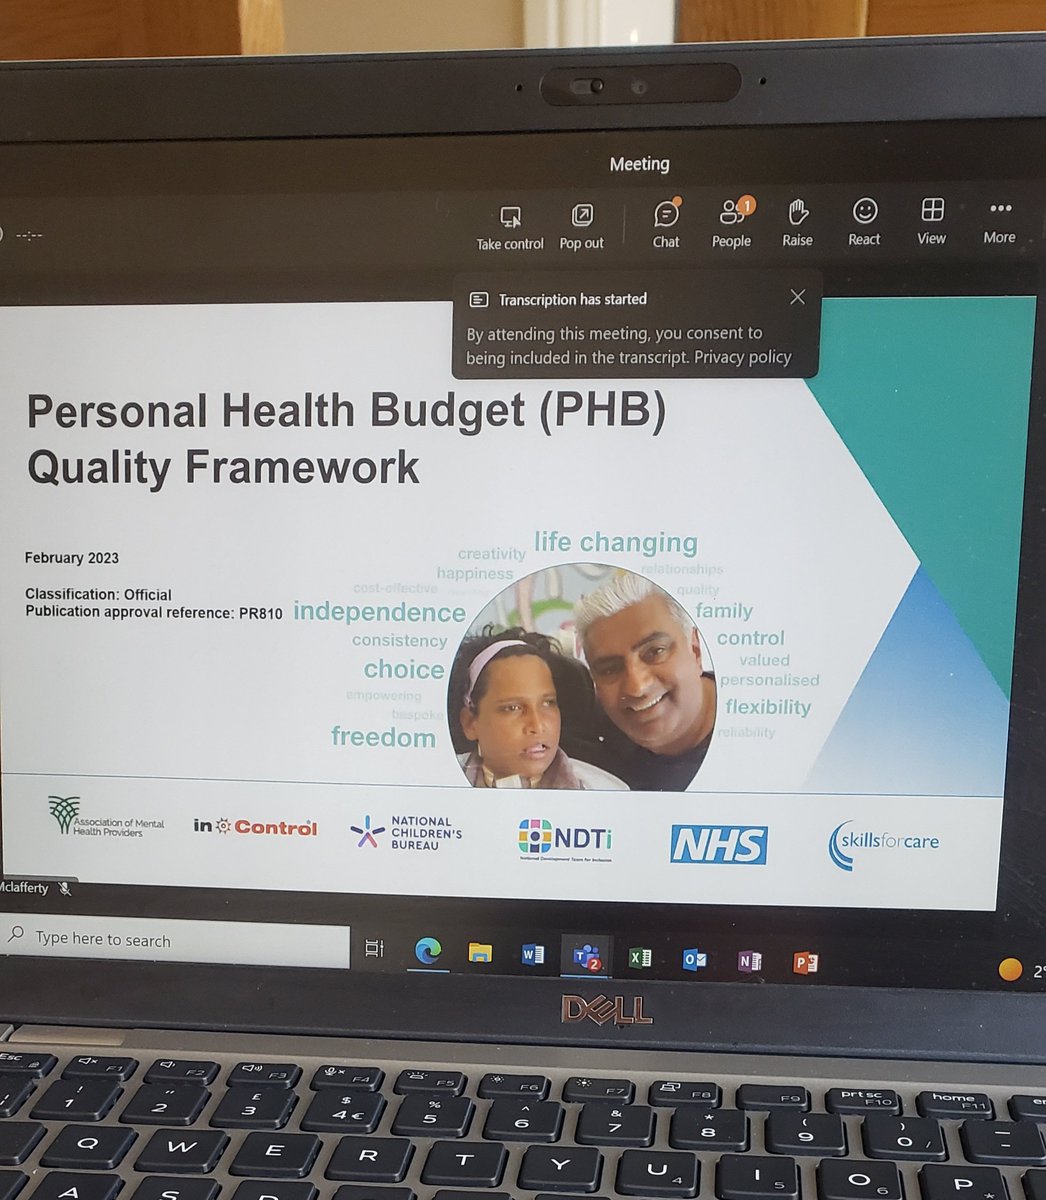 Good summary & conversations on the #personalhealthbudget quality framework - lots of learning to apply #personalisedcare - what matters to you? - shared decision making- personalised care support plans as part of this.  @ryancowley1989